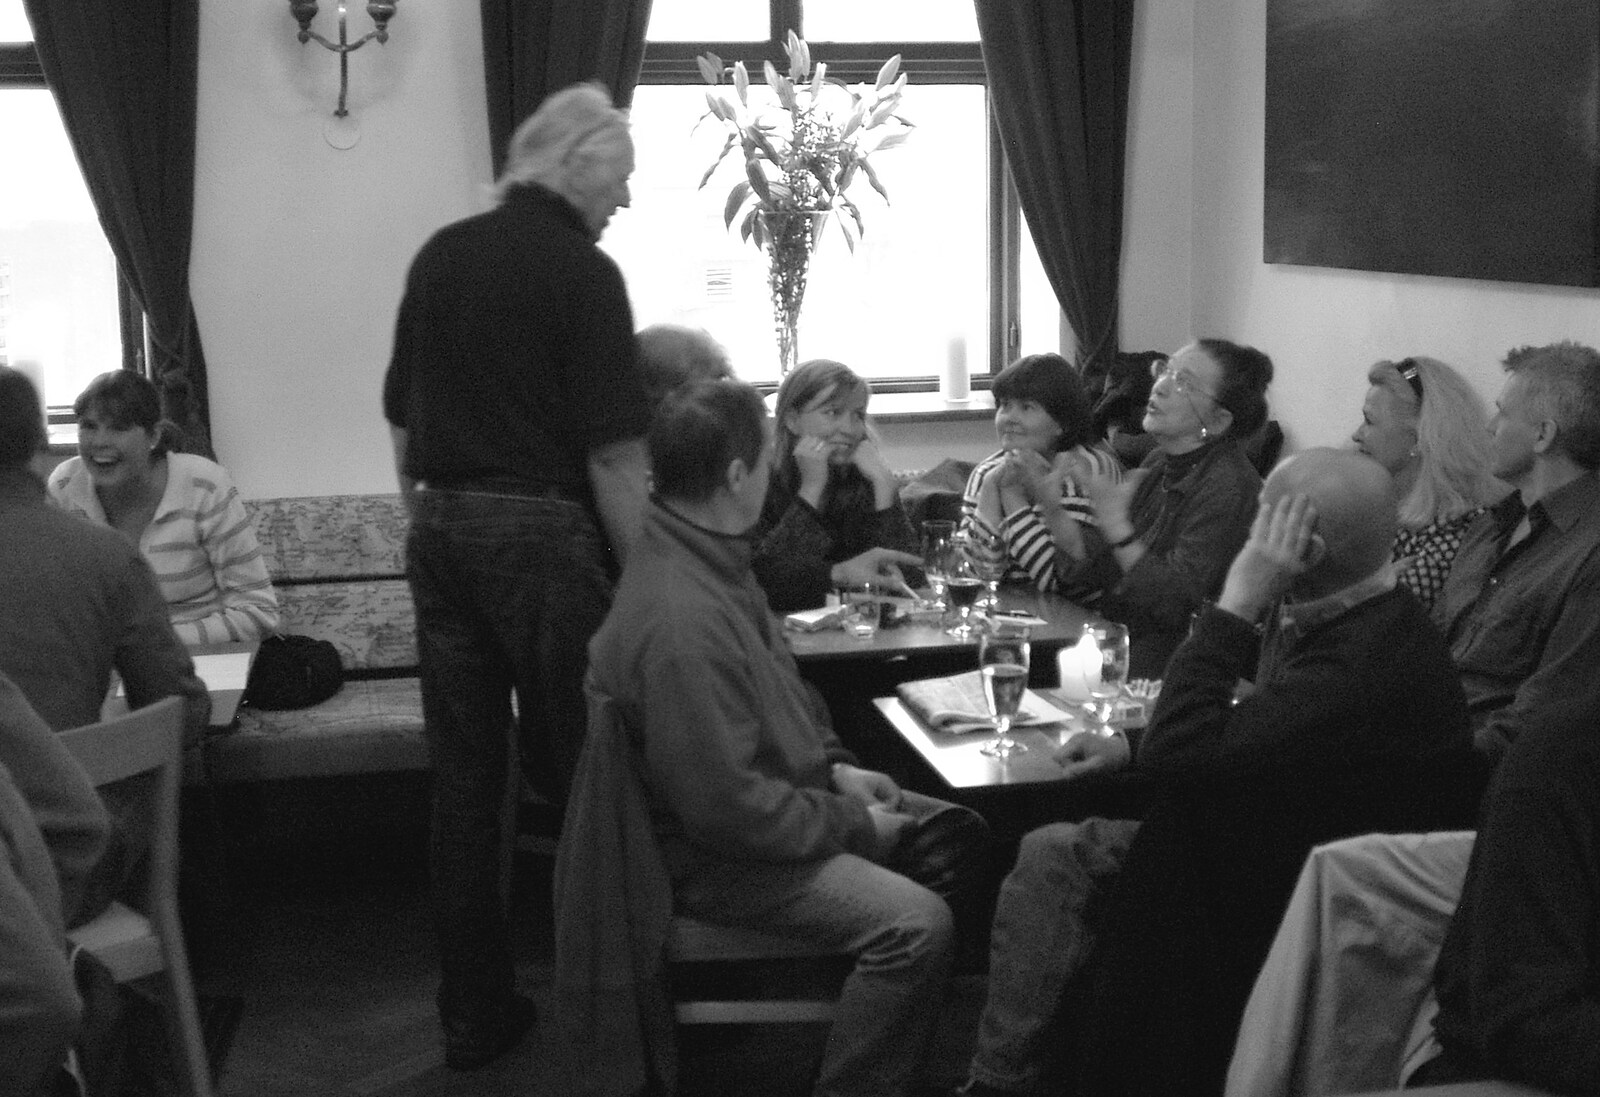 Inside Café Bacci, a pub quiz is occuring from A Postcard From Stockholm: A Working Trip to Sweden - 24th April 2005